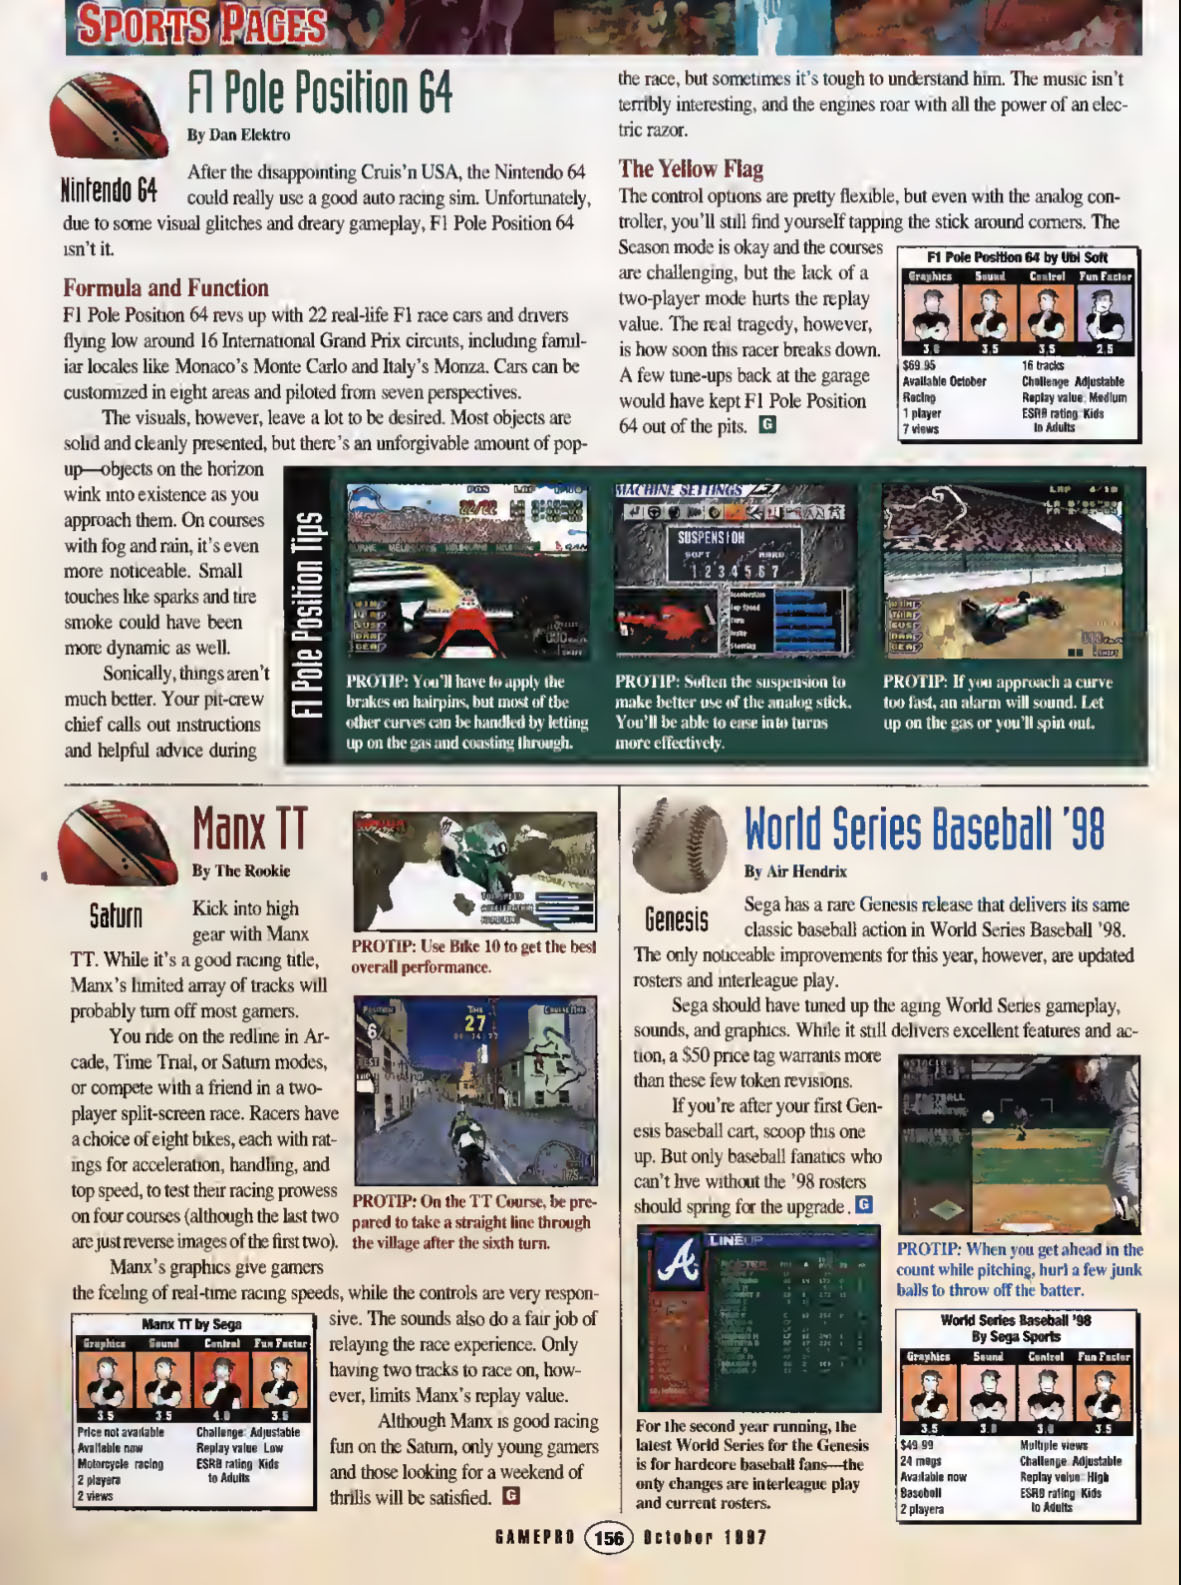 World Series Baseball '98 Review, GamePro October 1997 page 156